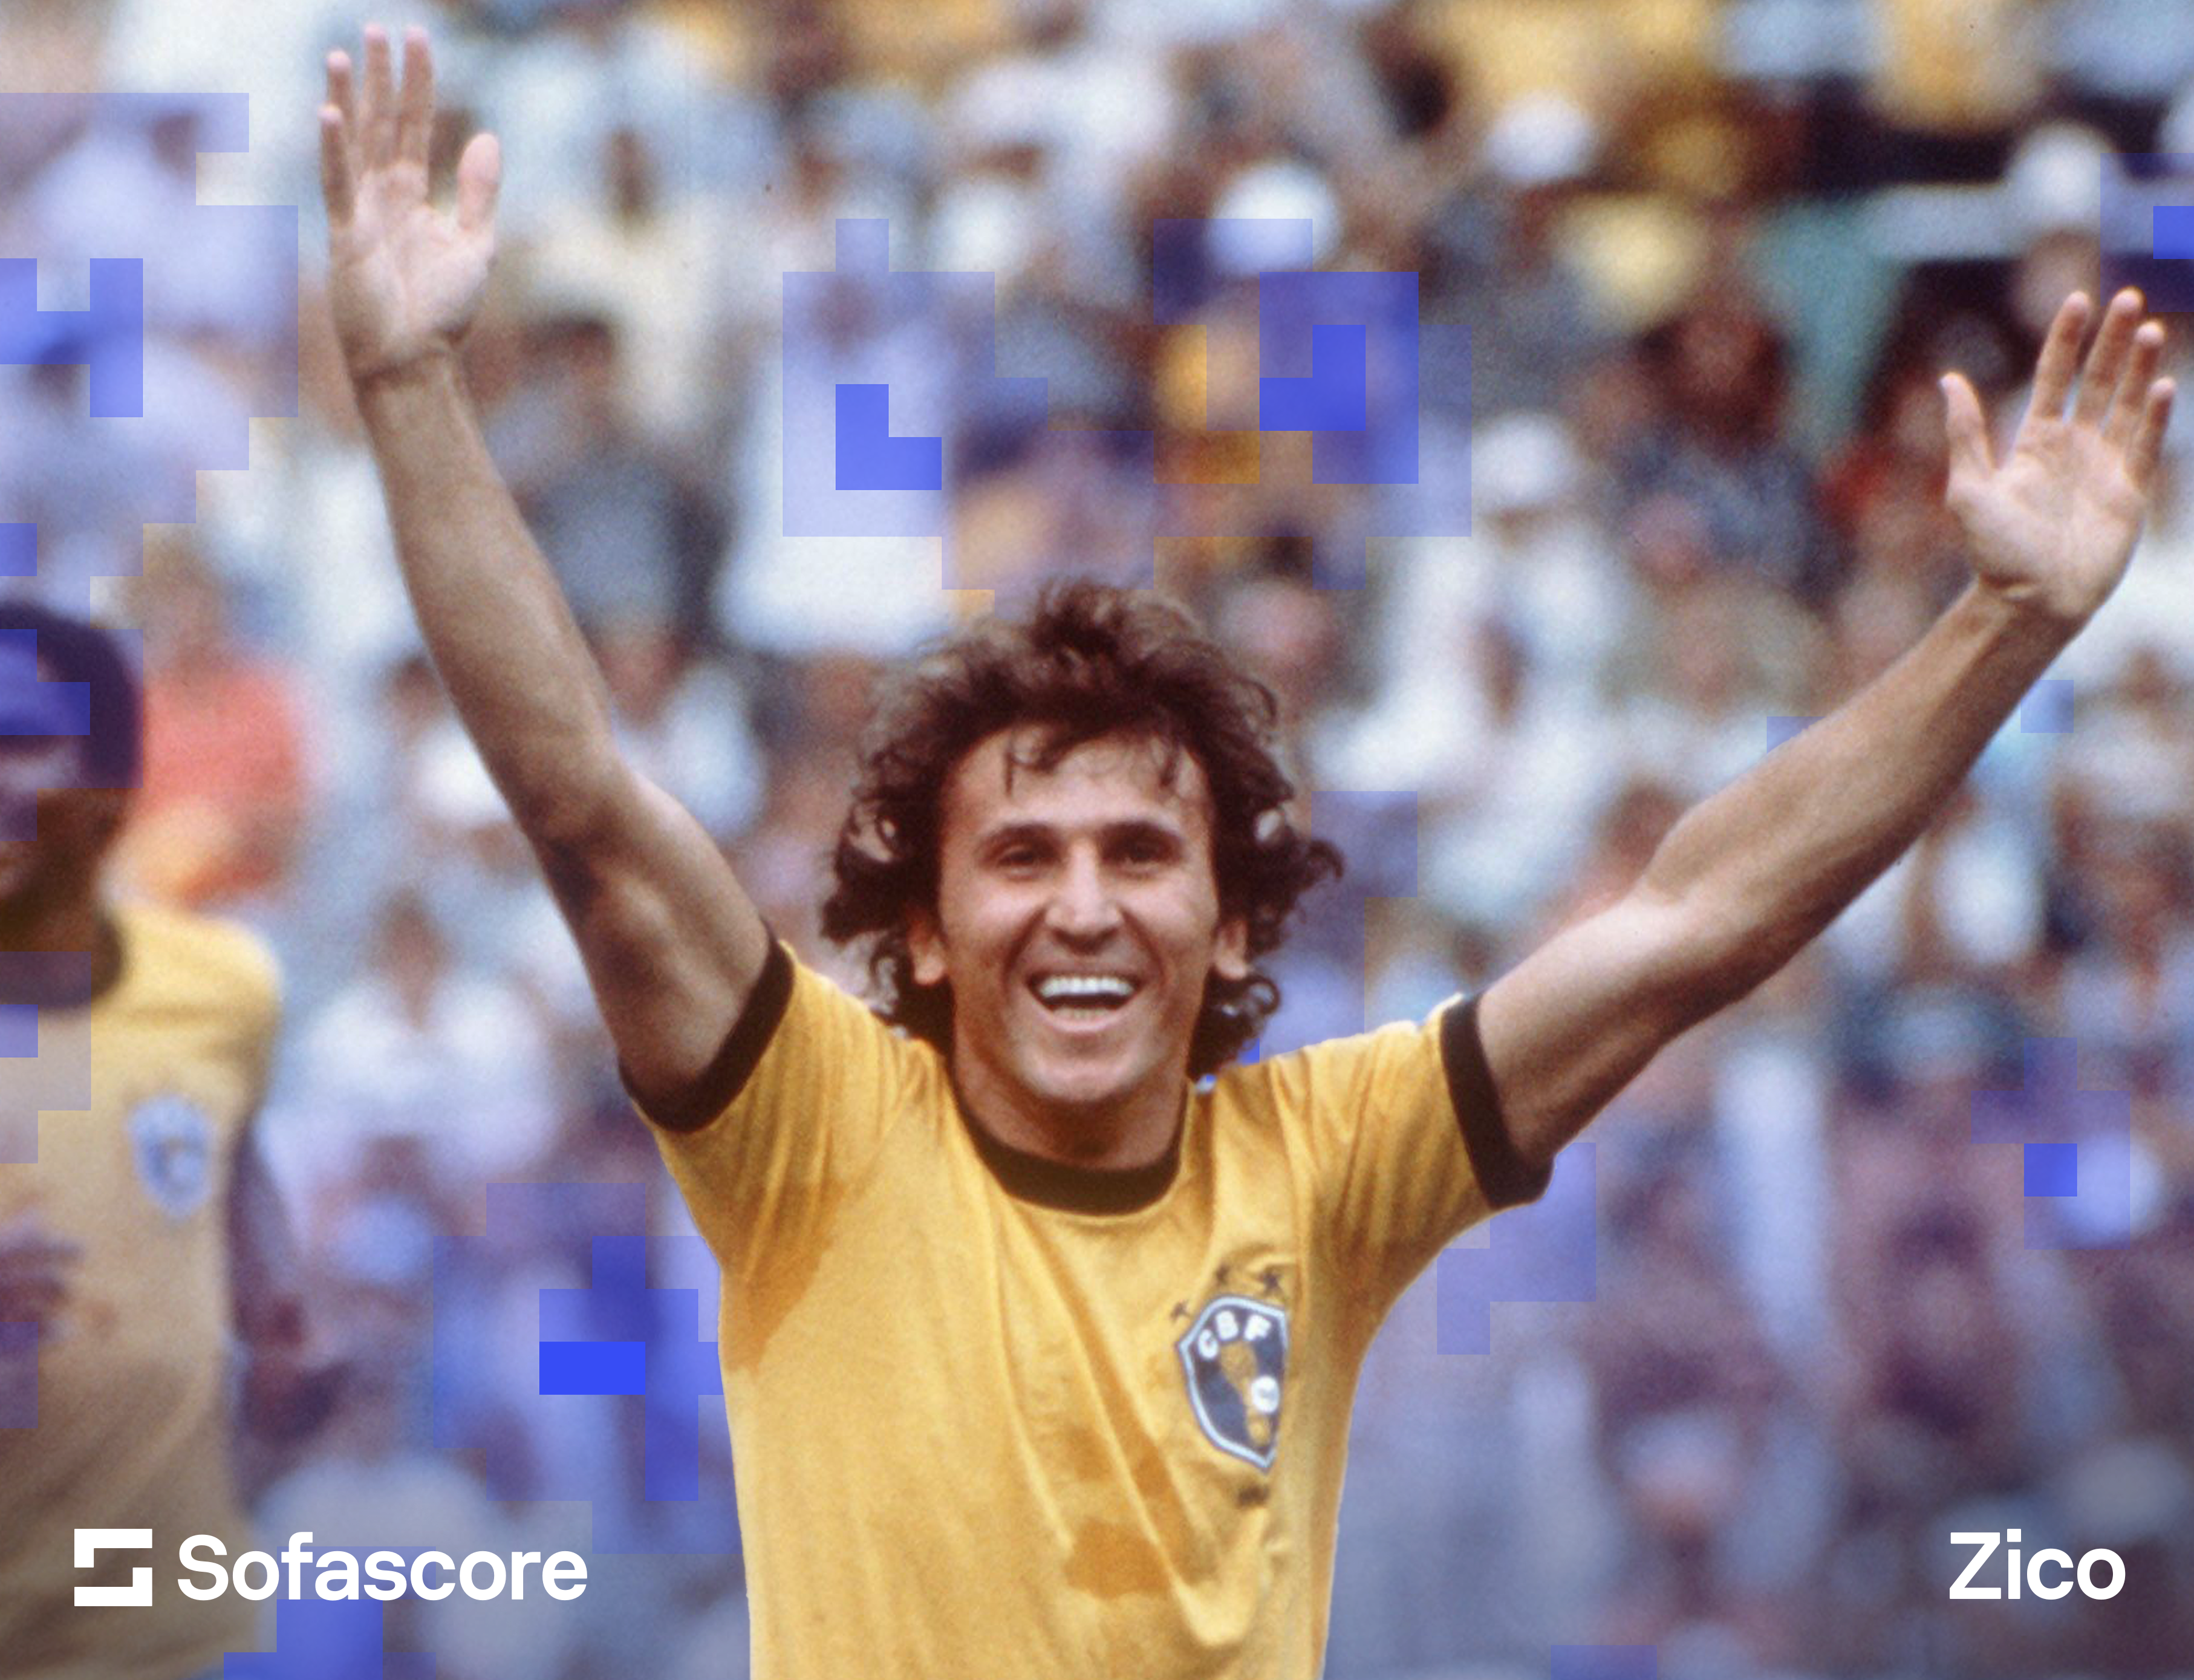 Sofascore joins forces with football legend Zico and unveils his Player of the Season award